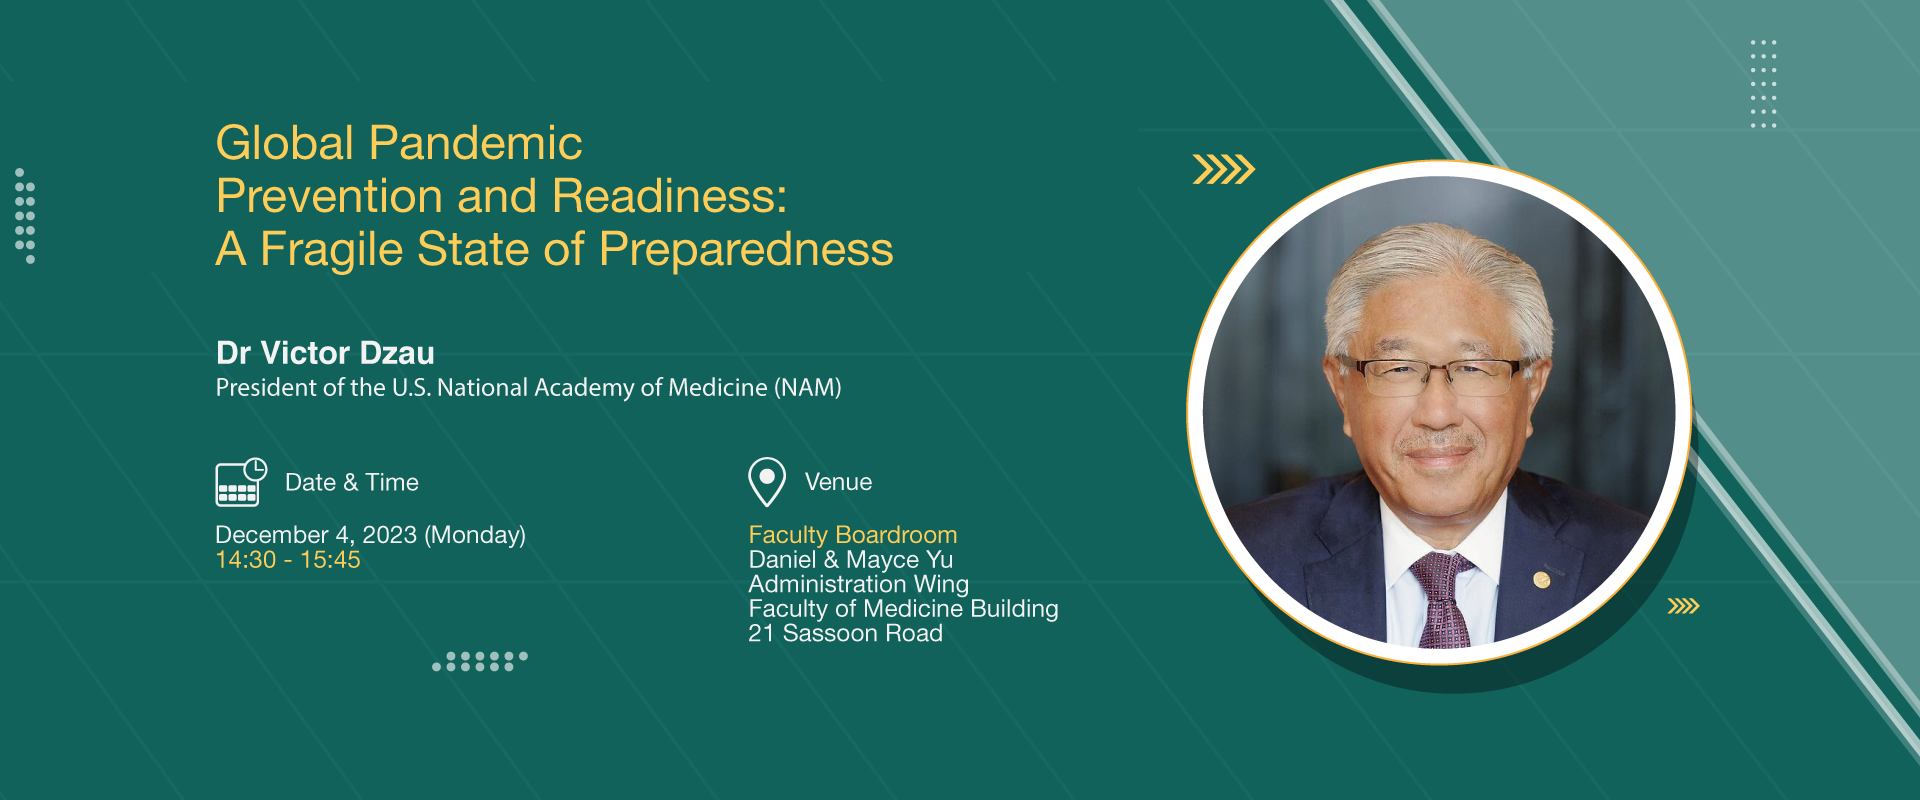 Distinguished Lecture by Dr Victor Dzau on Global Pandemic Prevention and Readiness: A Fragile State of Preparedness